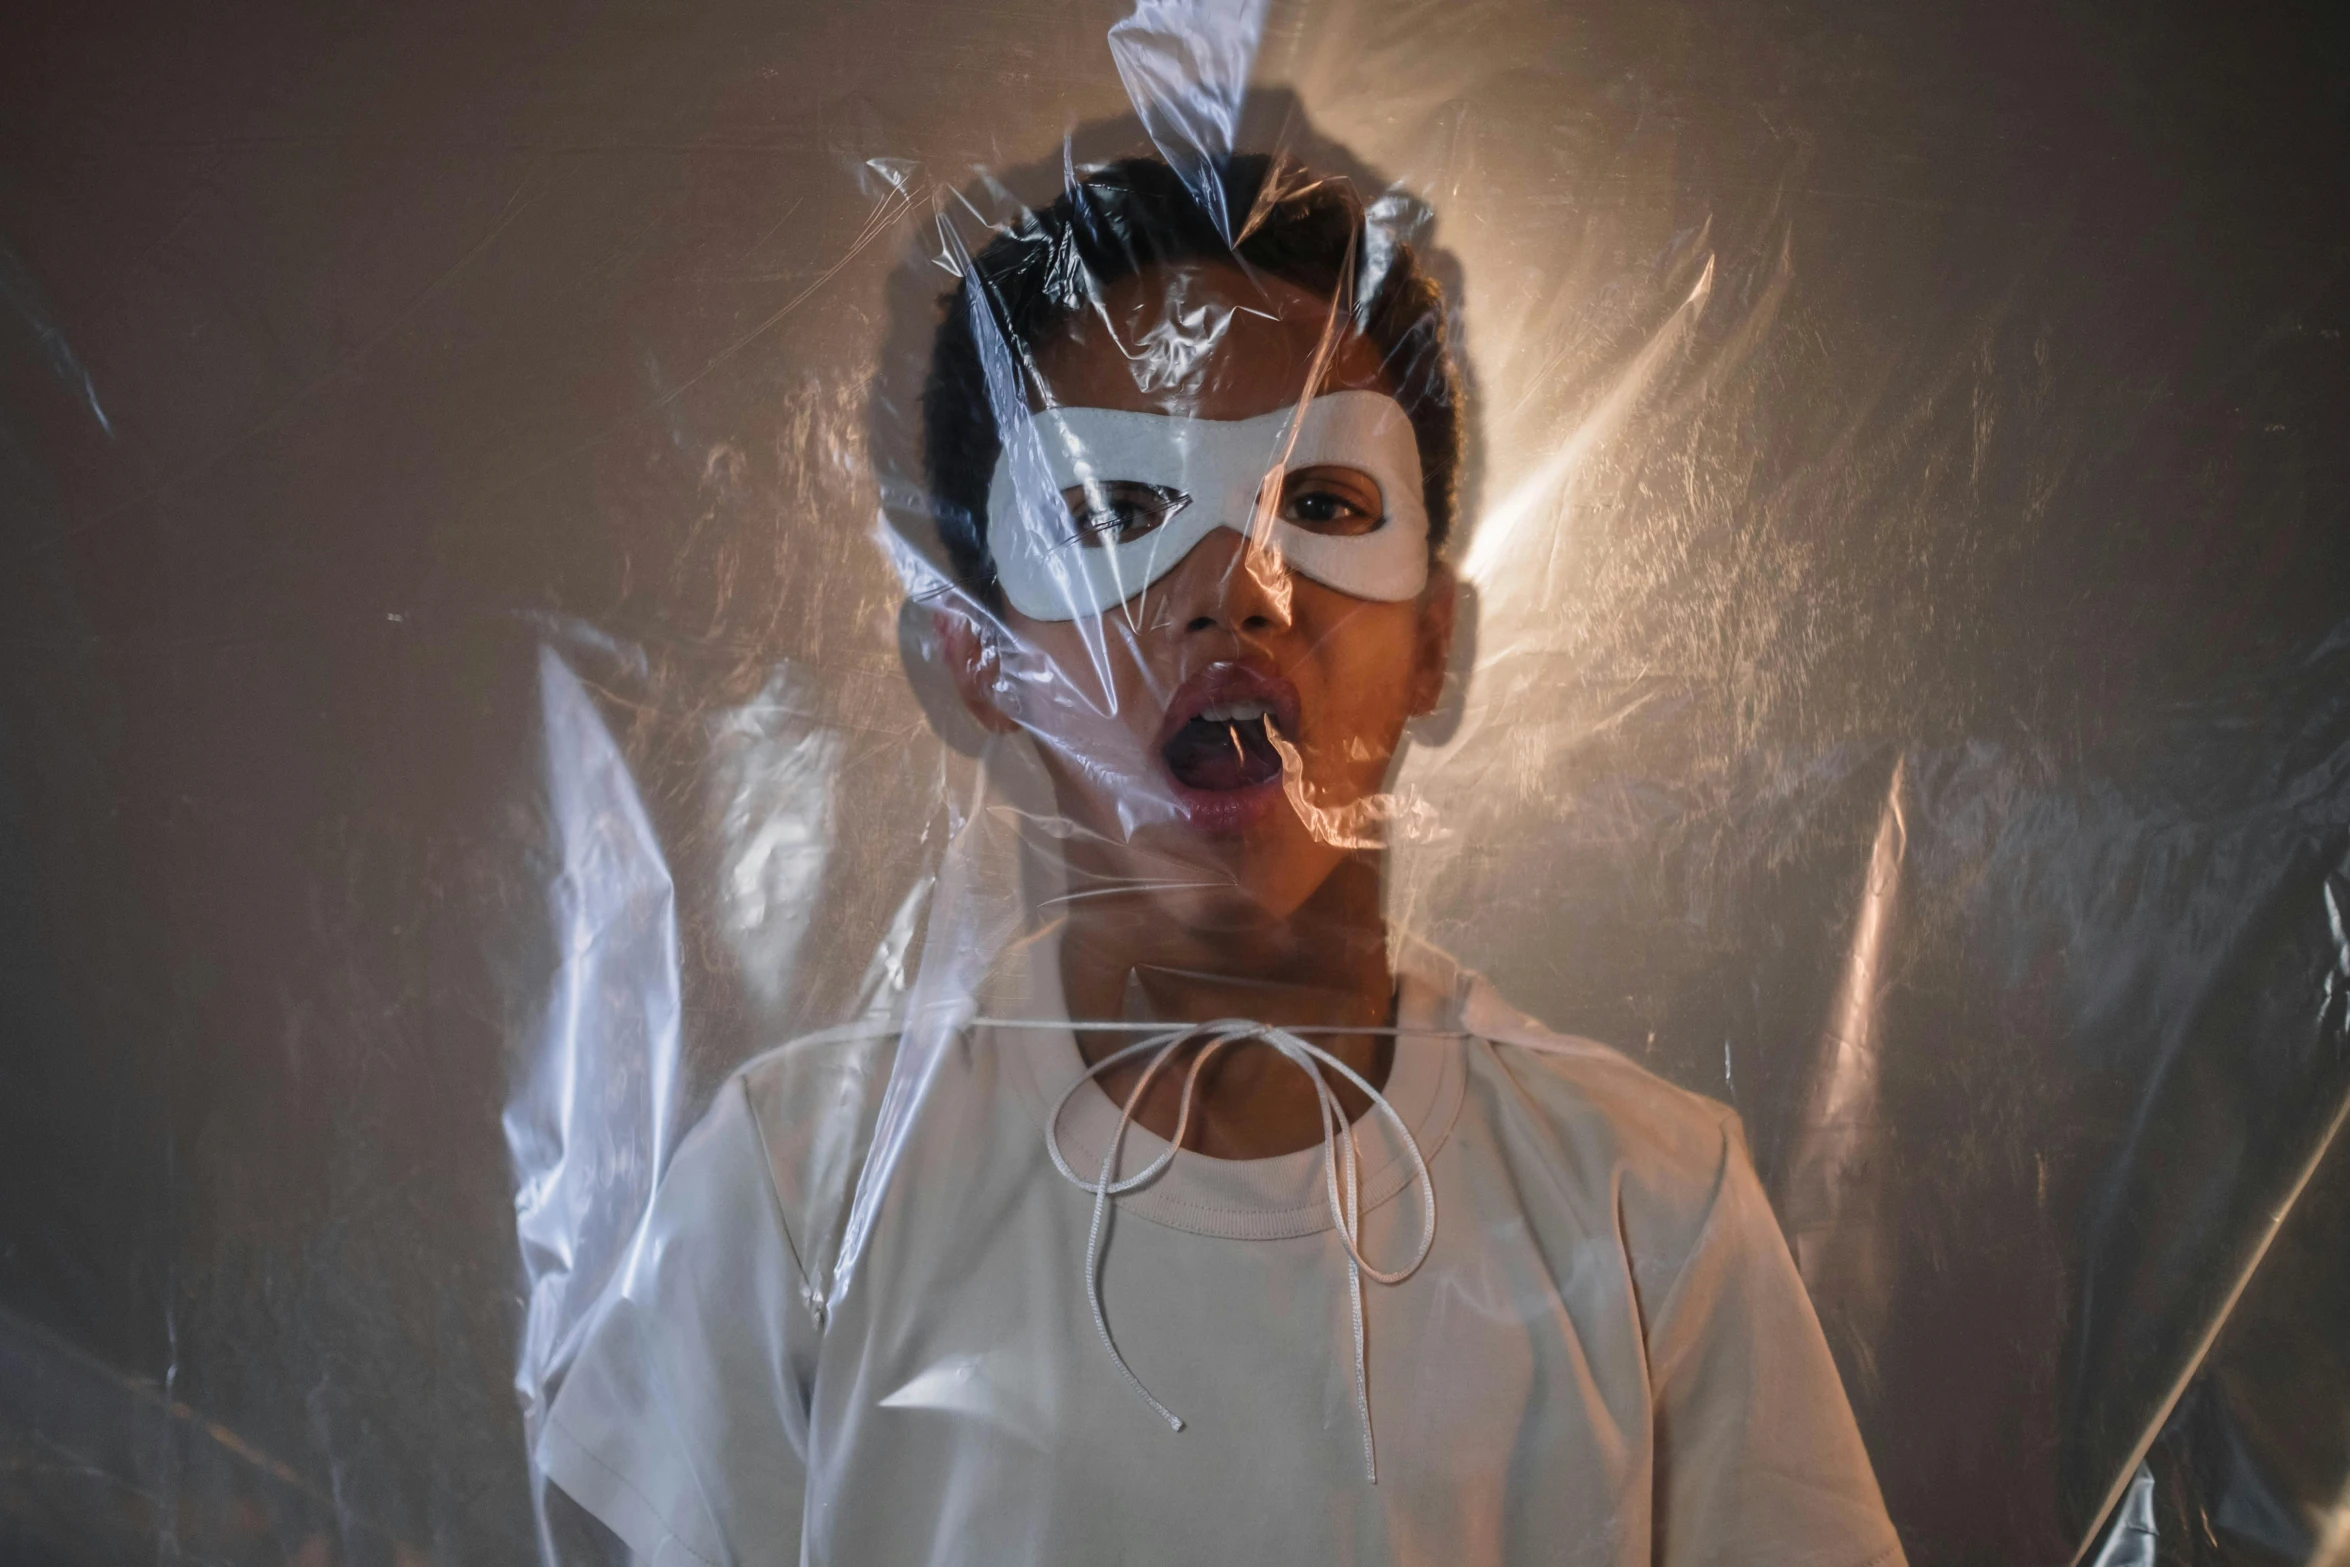 a close up of a person wearing a mask, an album cover, pexels contest winner, conceptual art, wearing translucent sheet, young boy, with wires and bandages, claustrophobic room